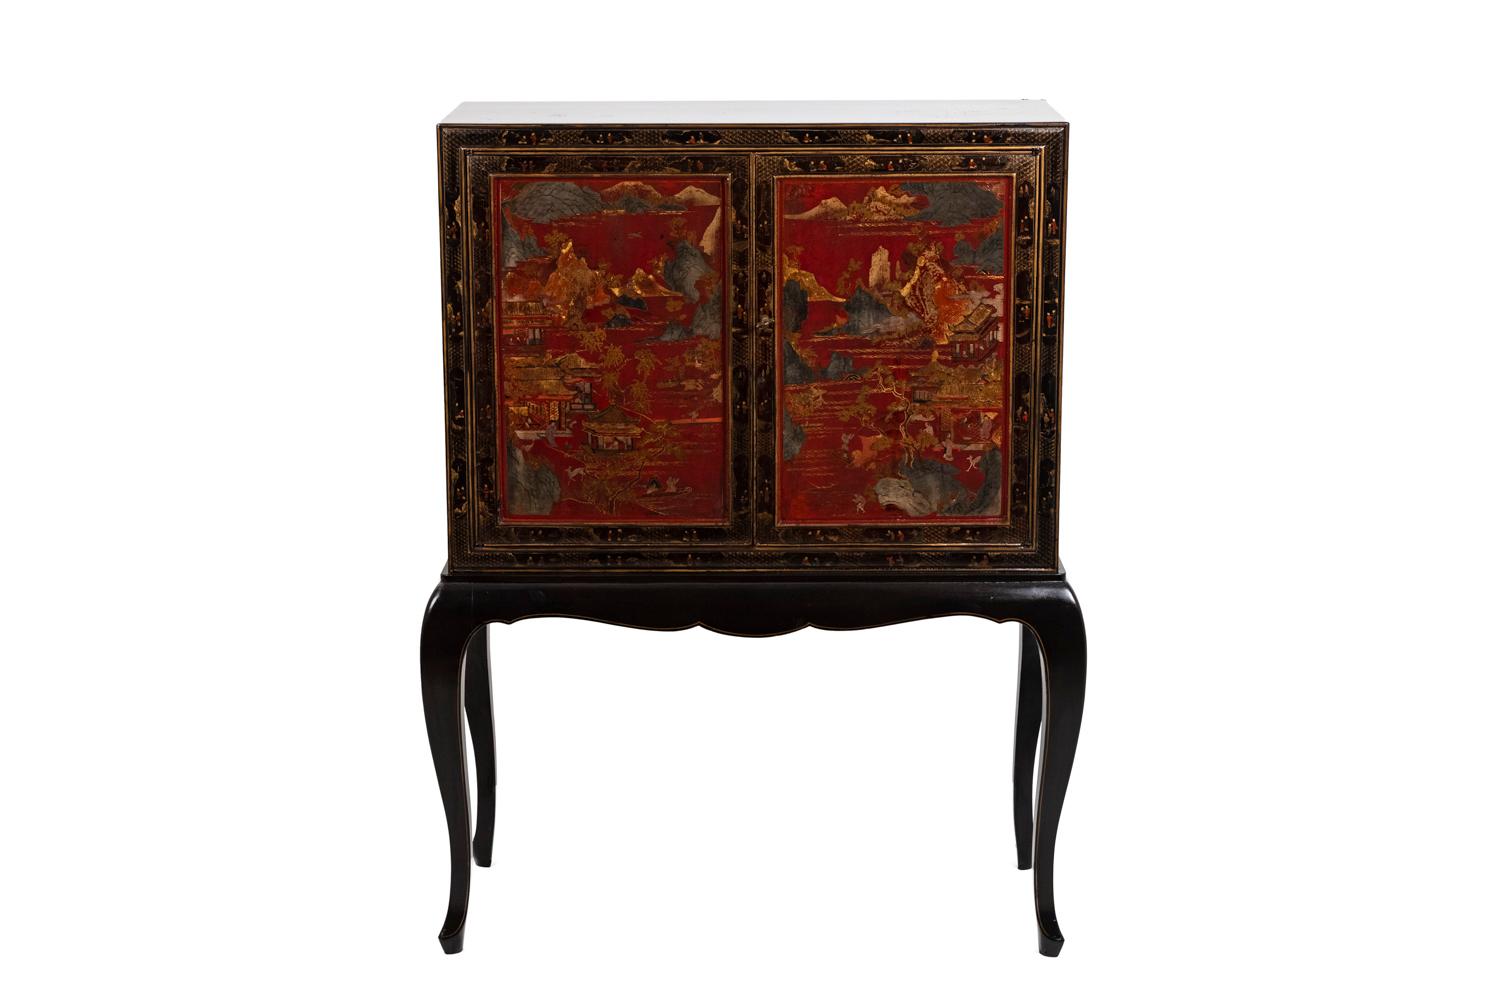 Chinese style cabinet in black and red lacquered wood with gilt highlights opening by two-door leaves on a compartment with a shelf. It stands on four cabriole legs. Decor of two cartouches on the door leaves framing Chinese style landscape scenes